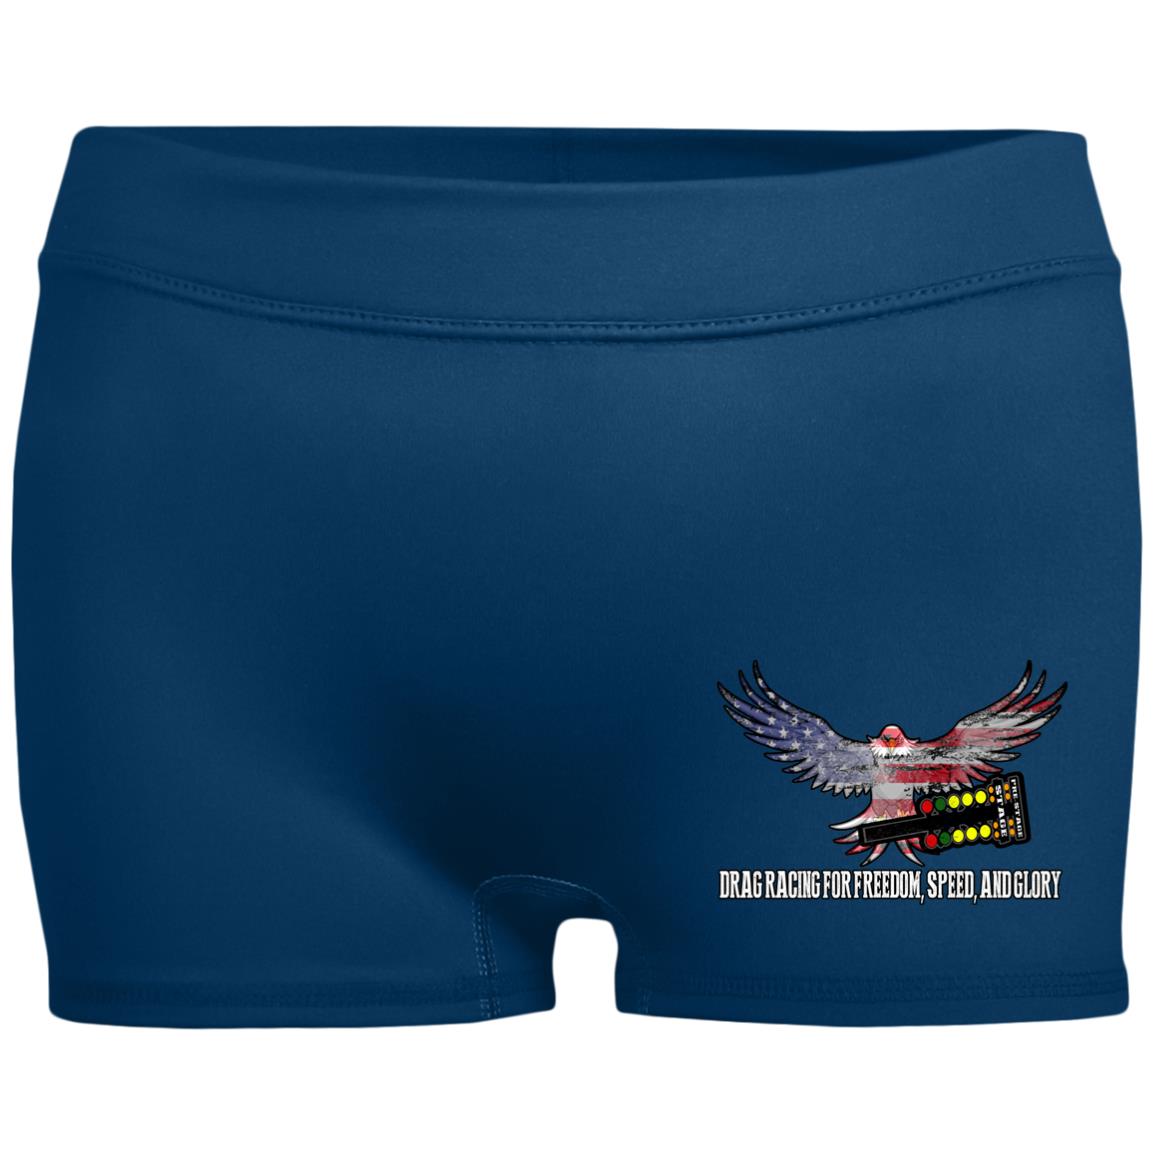 Drag Racing for Freedom, Speed, and Glory Ladies' Fitted Moisture-Wicking 2.5 inch Inseam Shorts